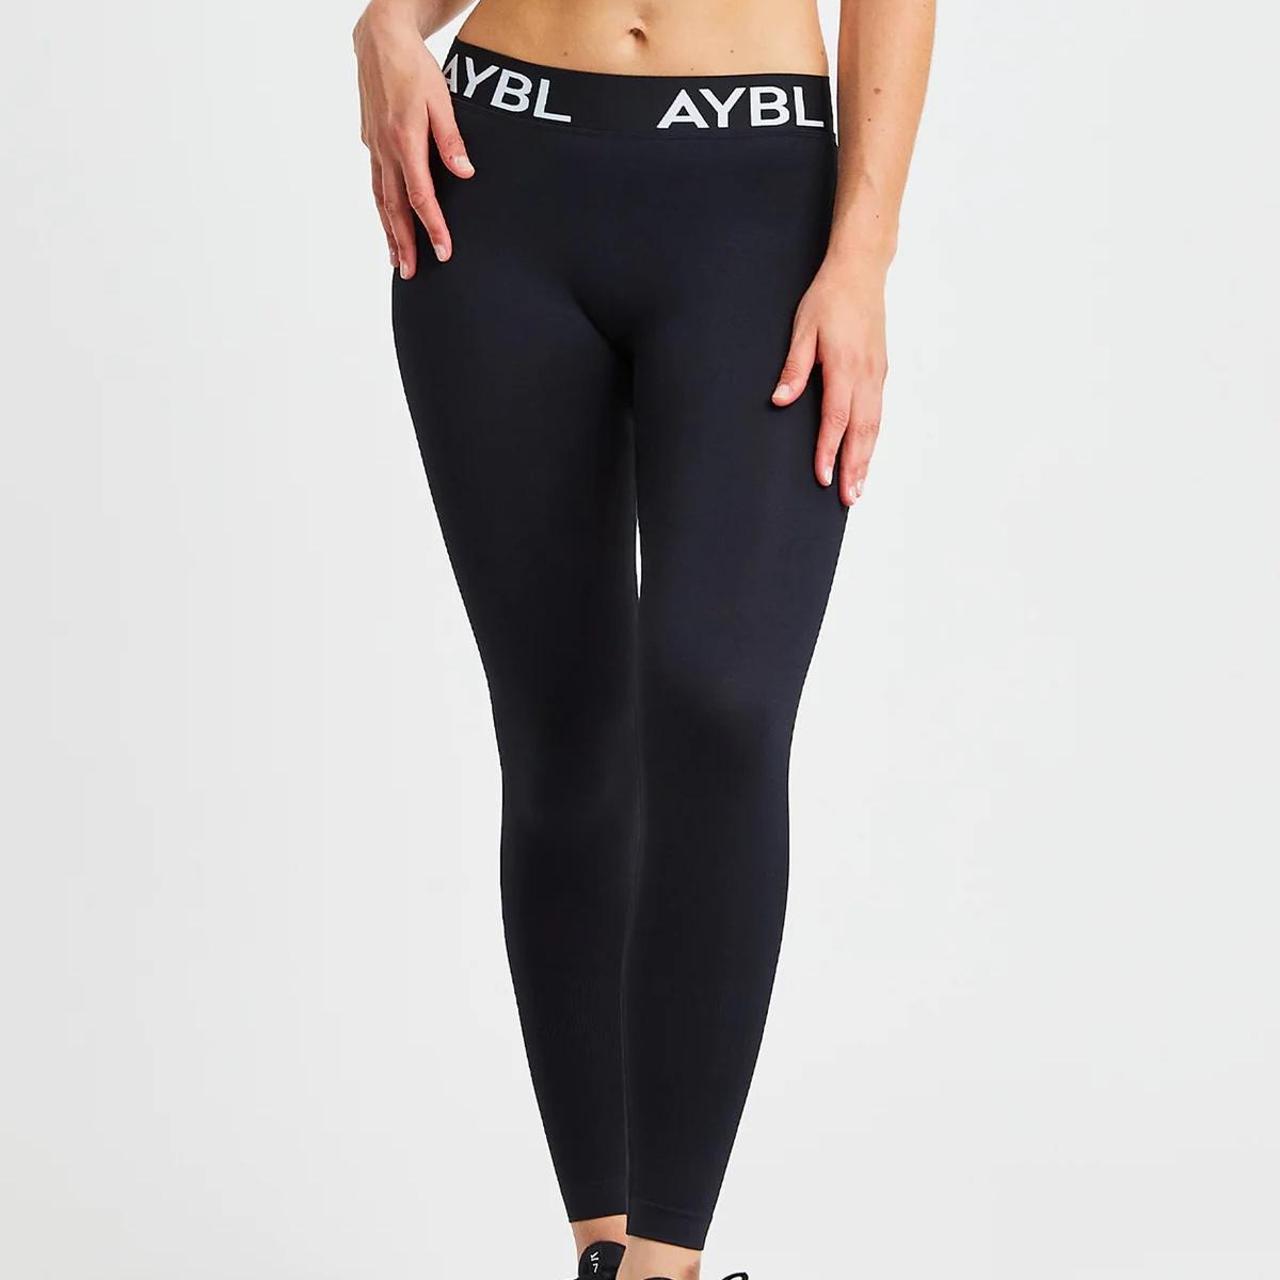 AYBL Gym leggins low rise, Never used , Size: Small